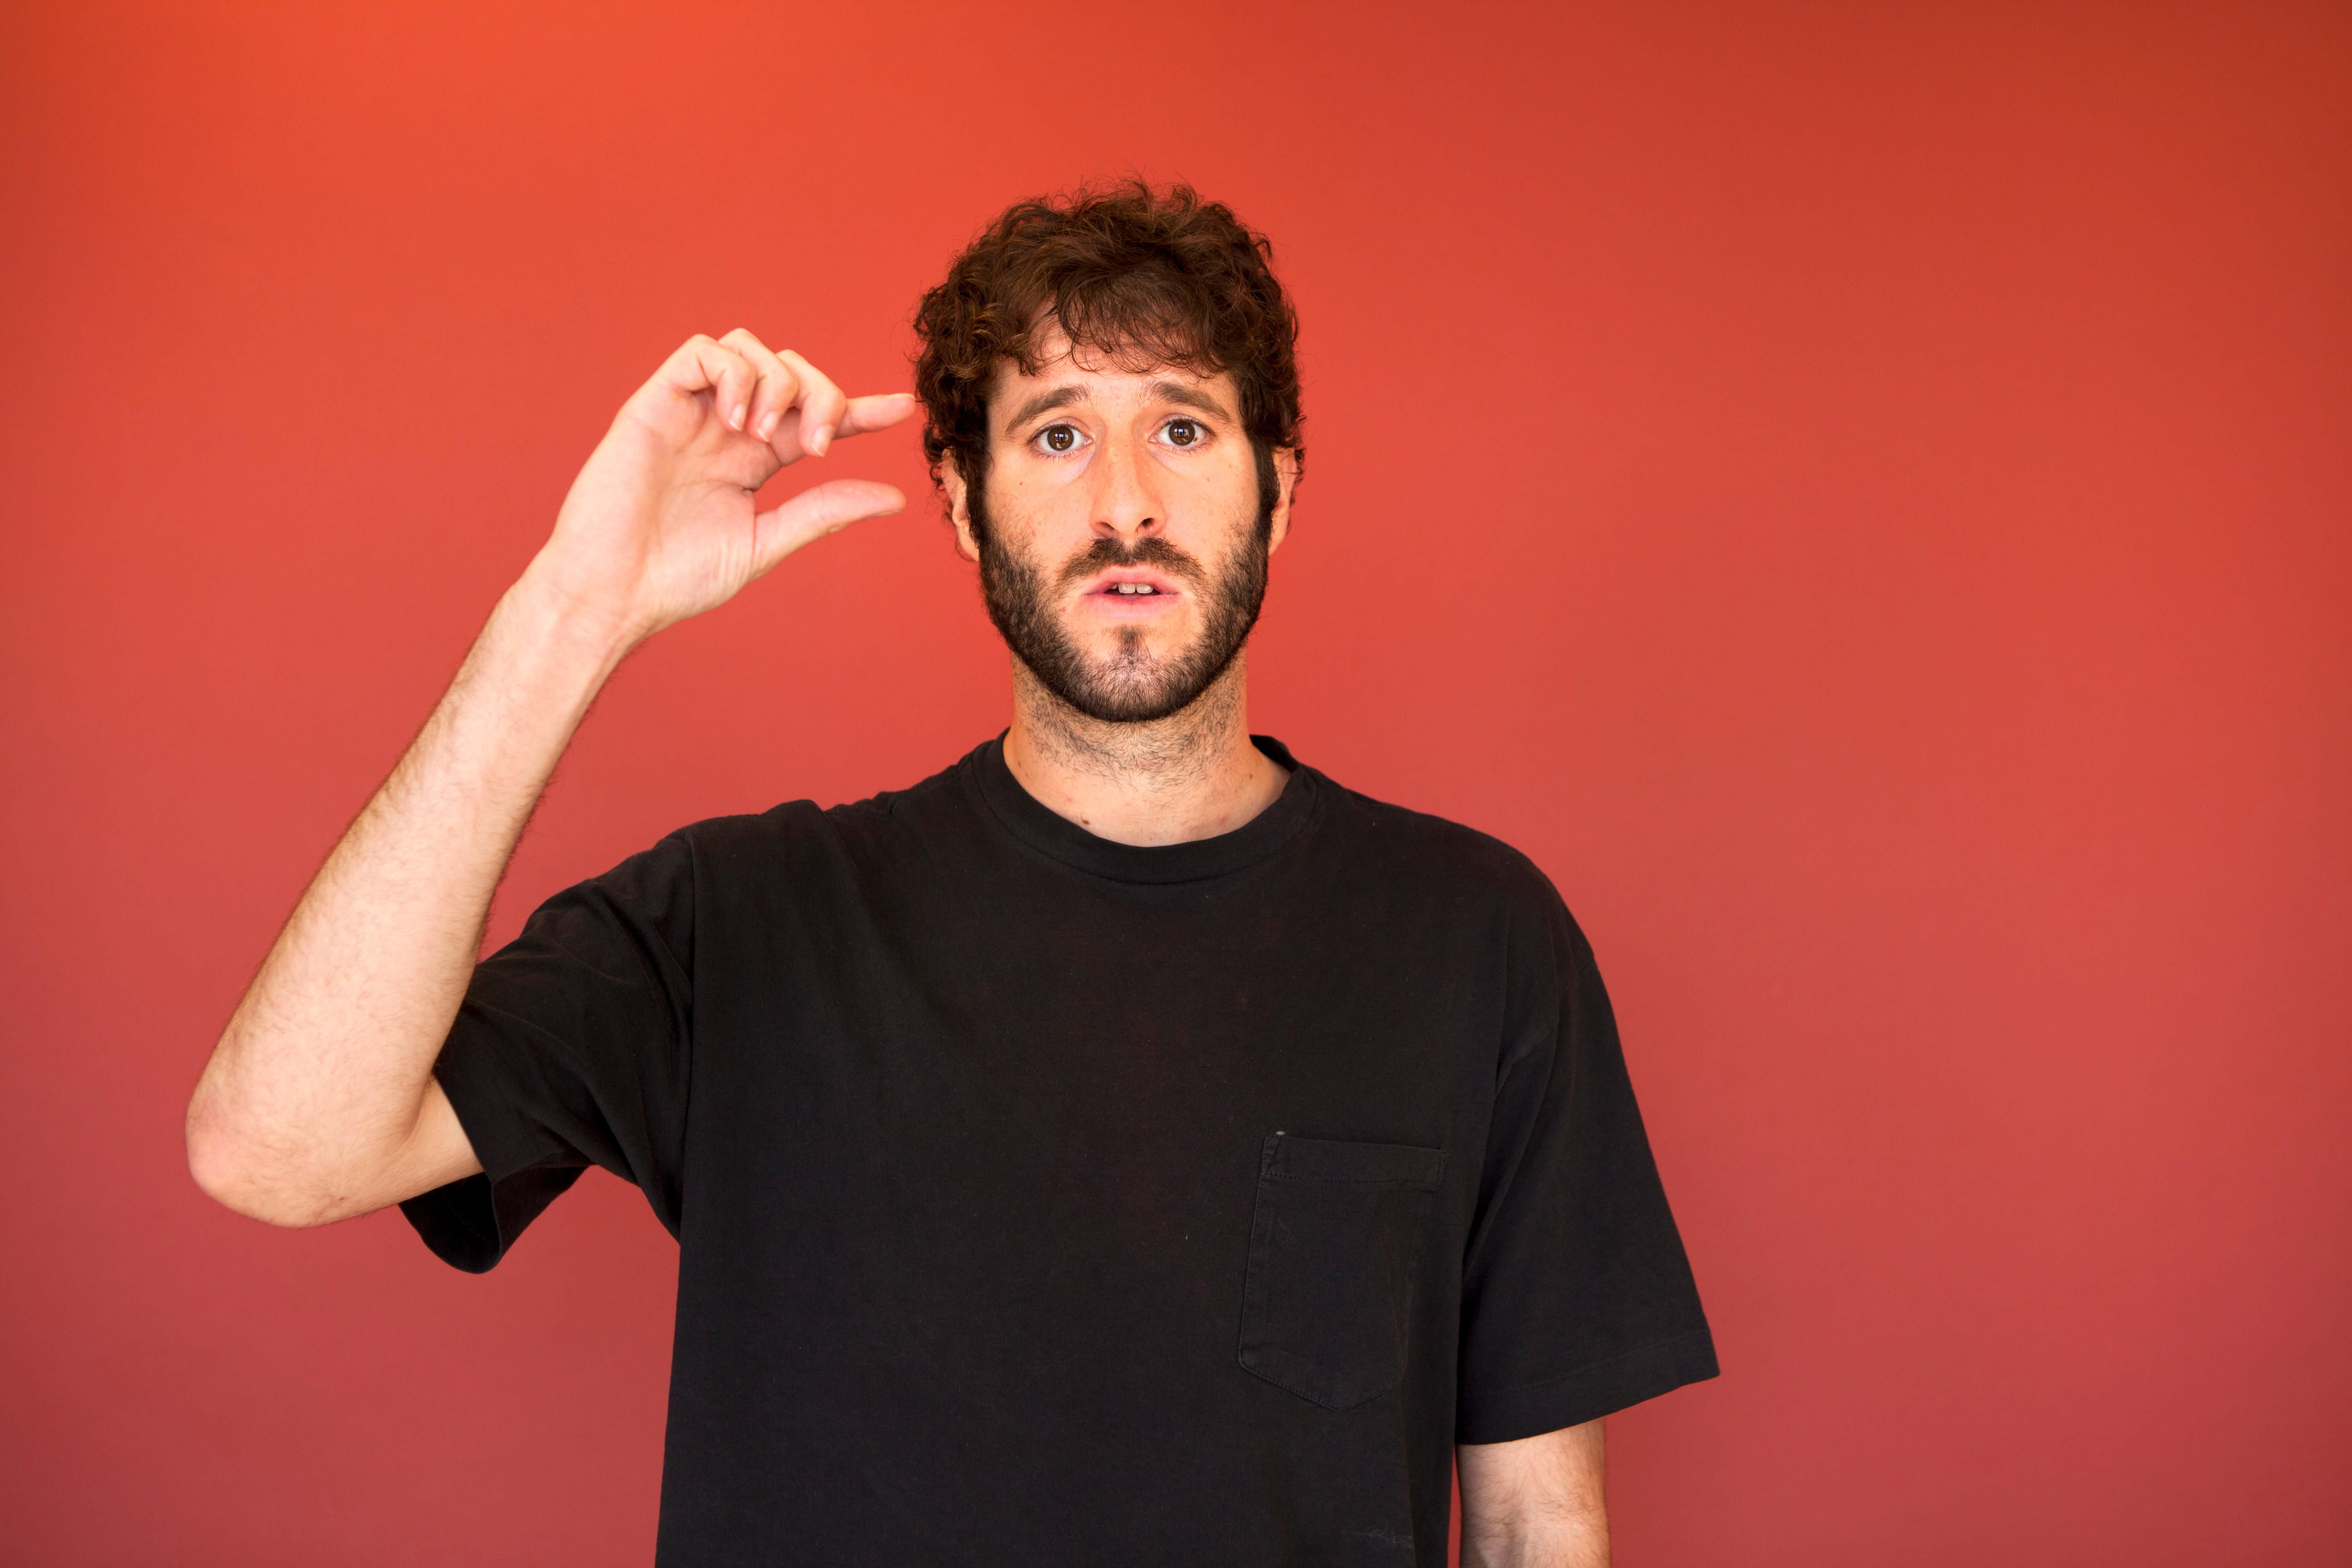 Professional Rapper? How Lil Dicky Mixed Comedy And Hip Hop To Top